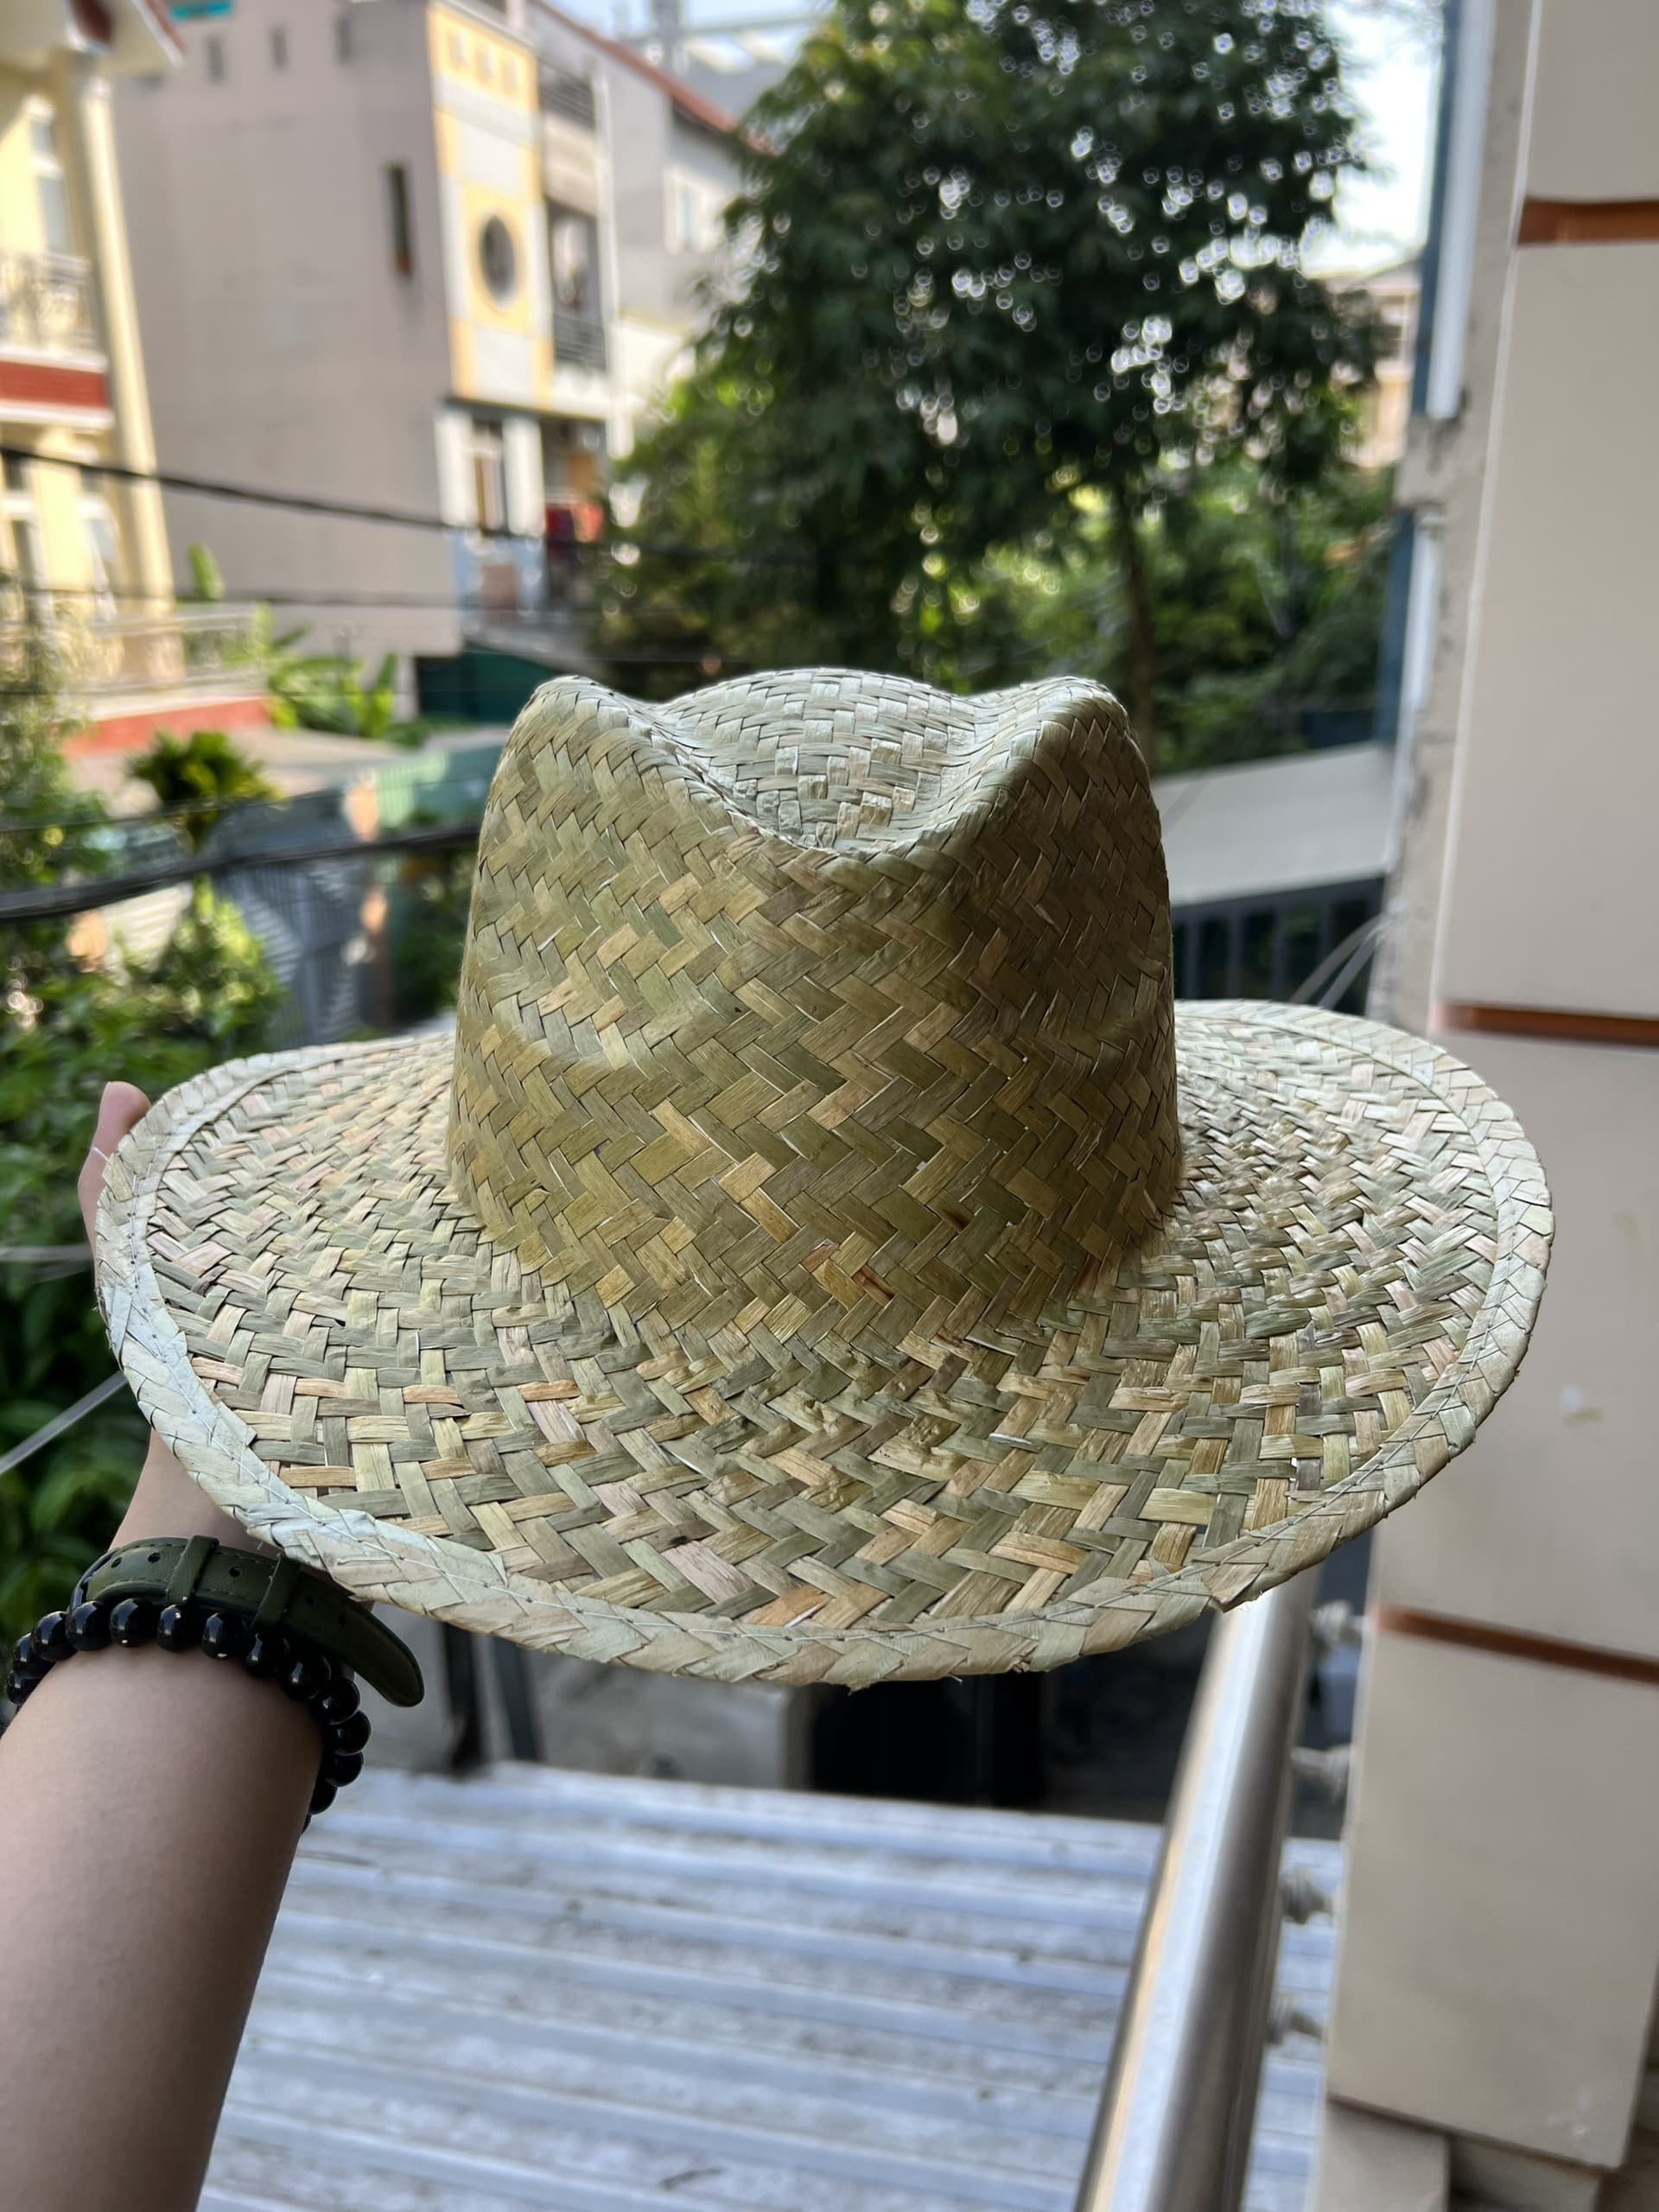 Sombrero_ Fedora_ Cow boy_ etc straw hat made from seagrass_palm leaf with customized ribbon color a